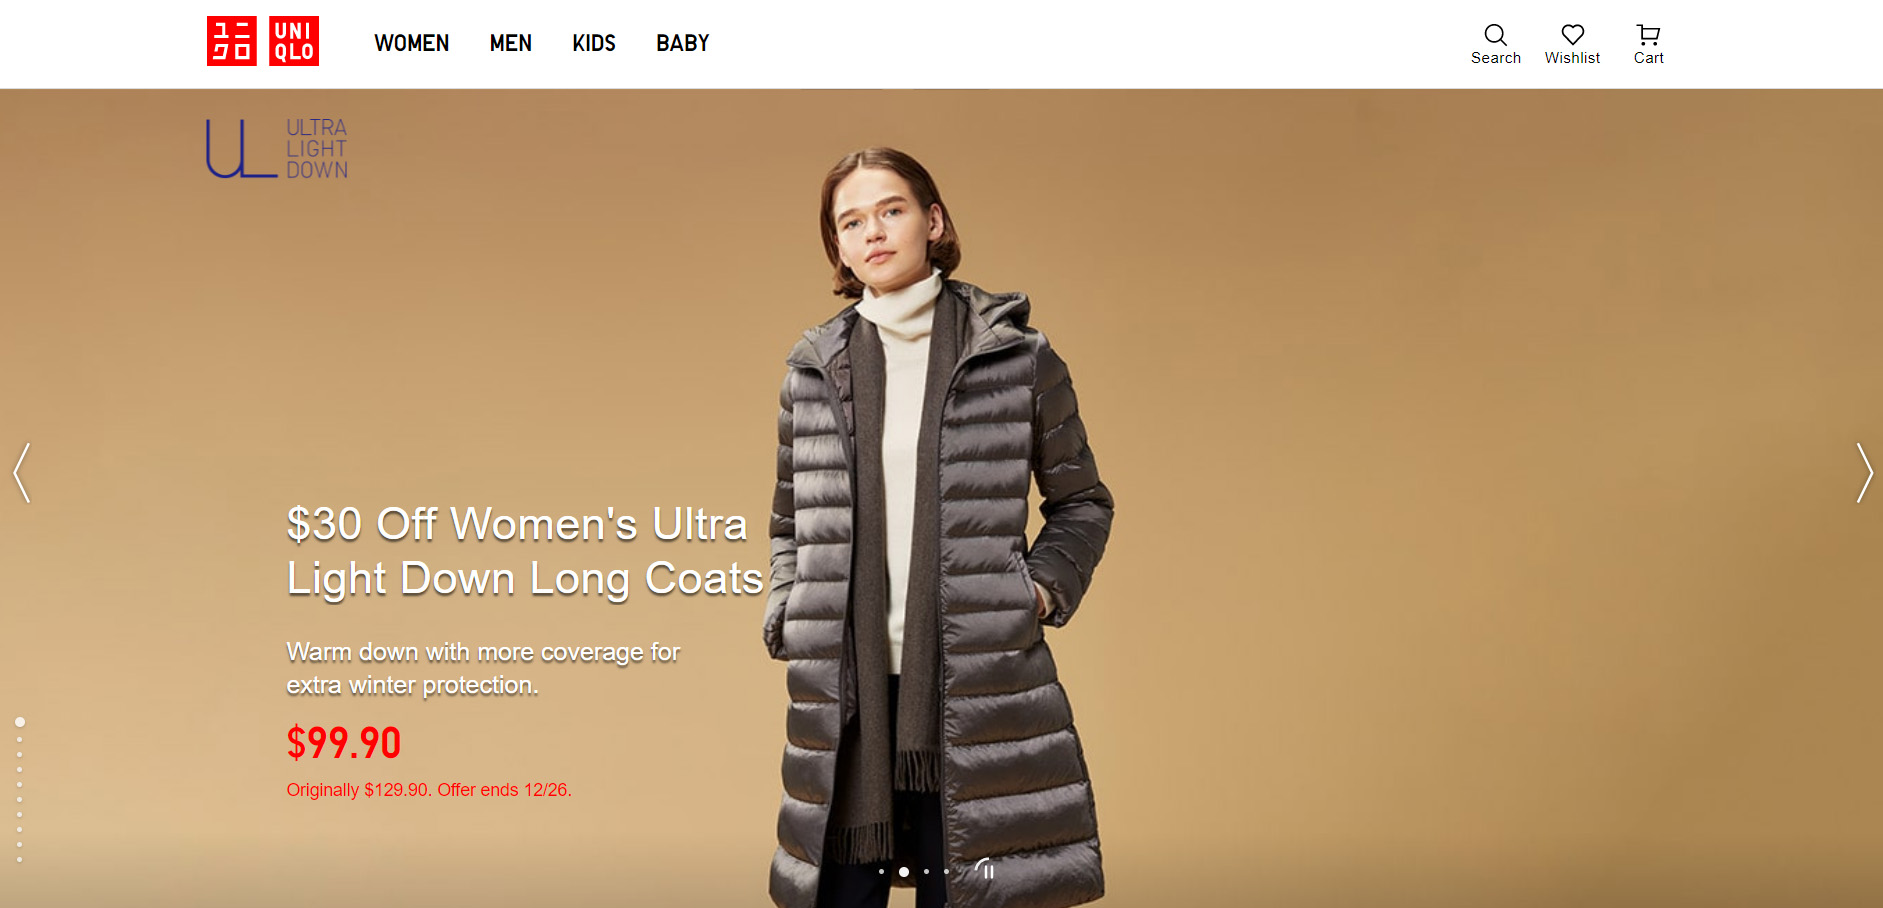 New offer launched: UNIQLO Affiliate Program